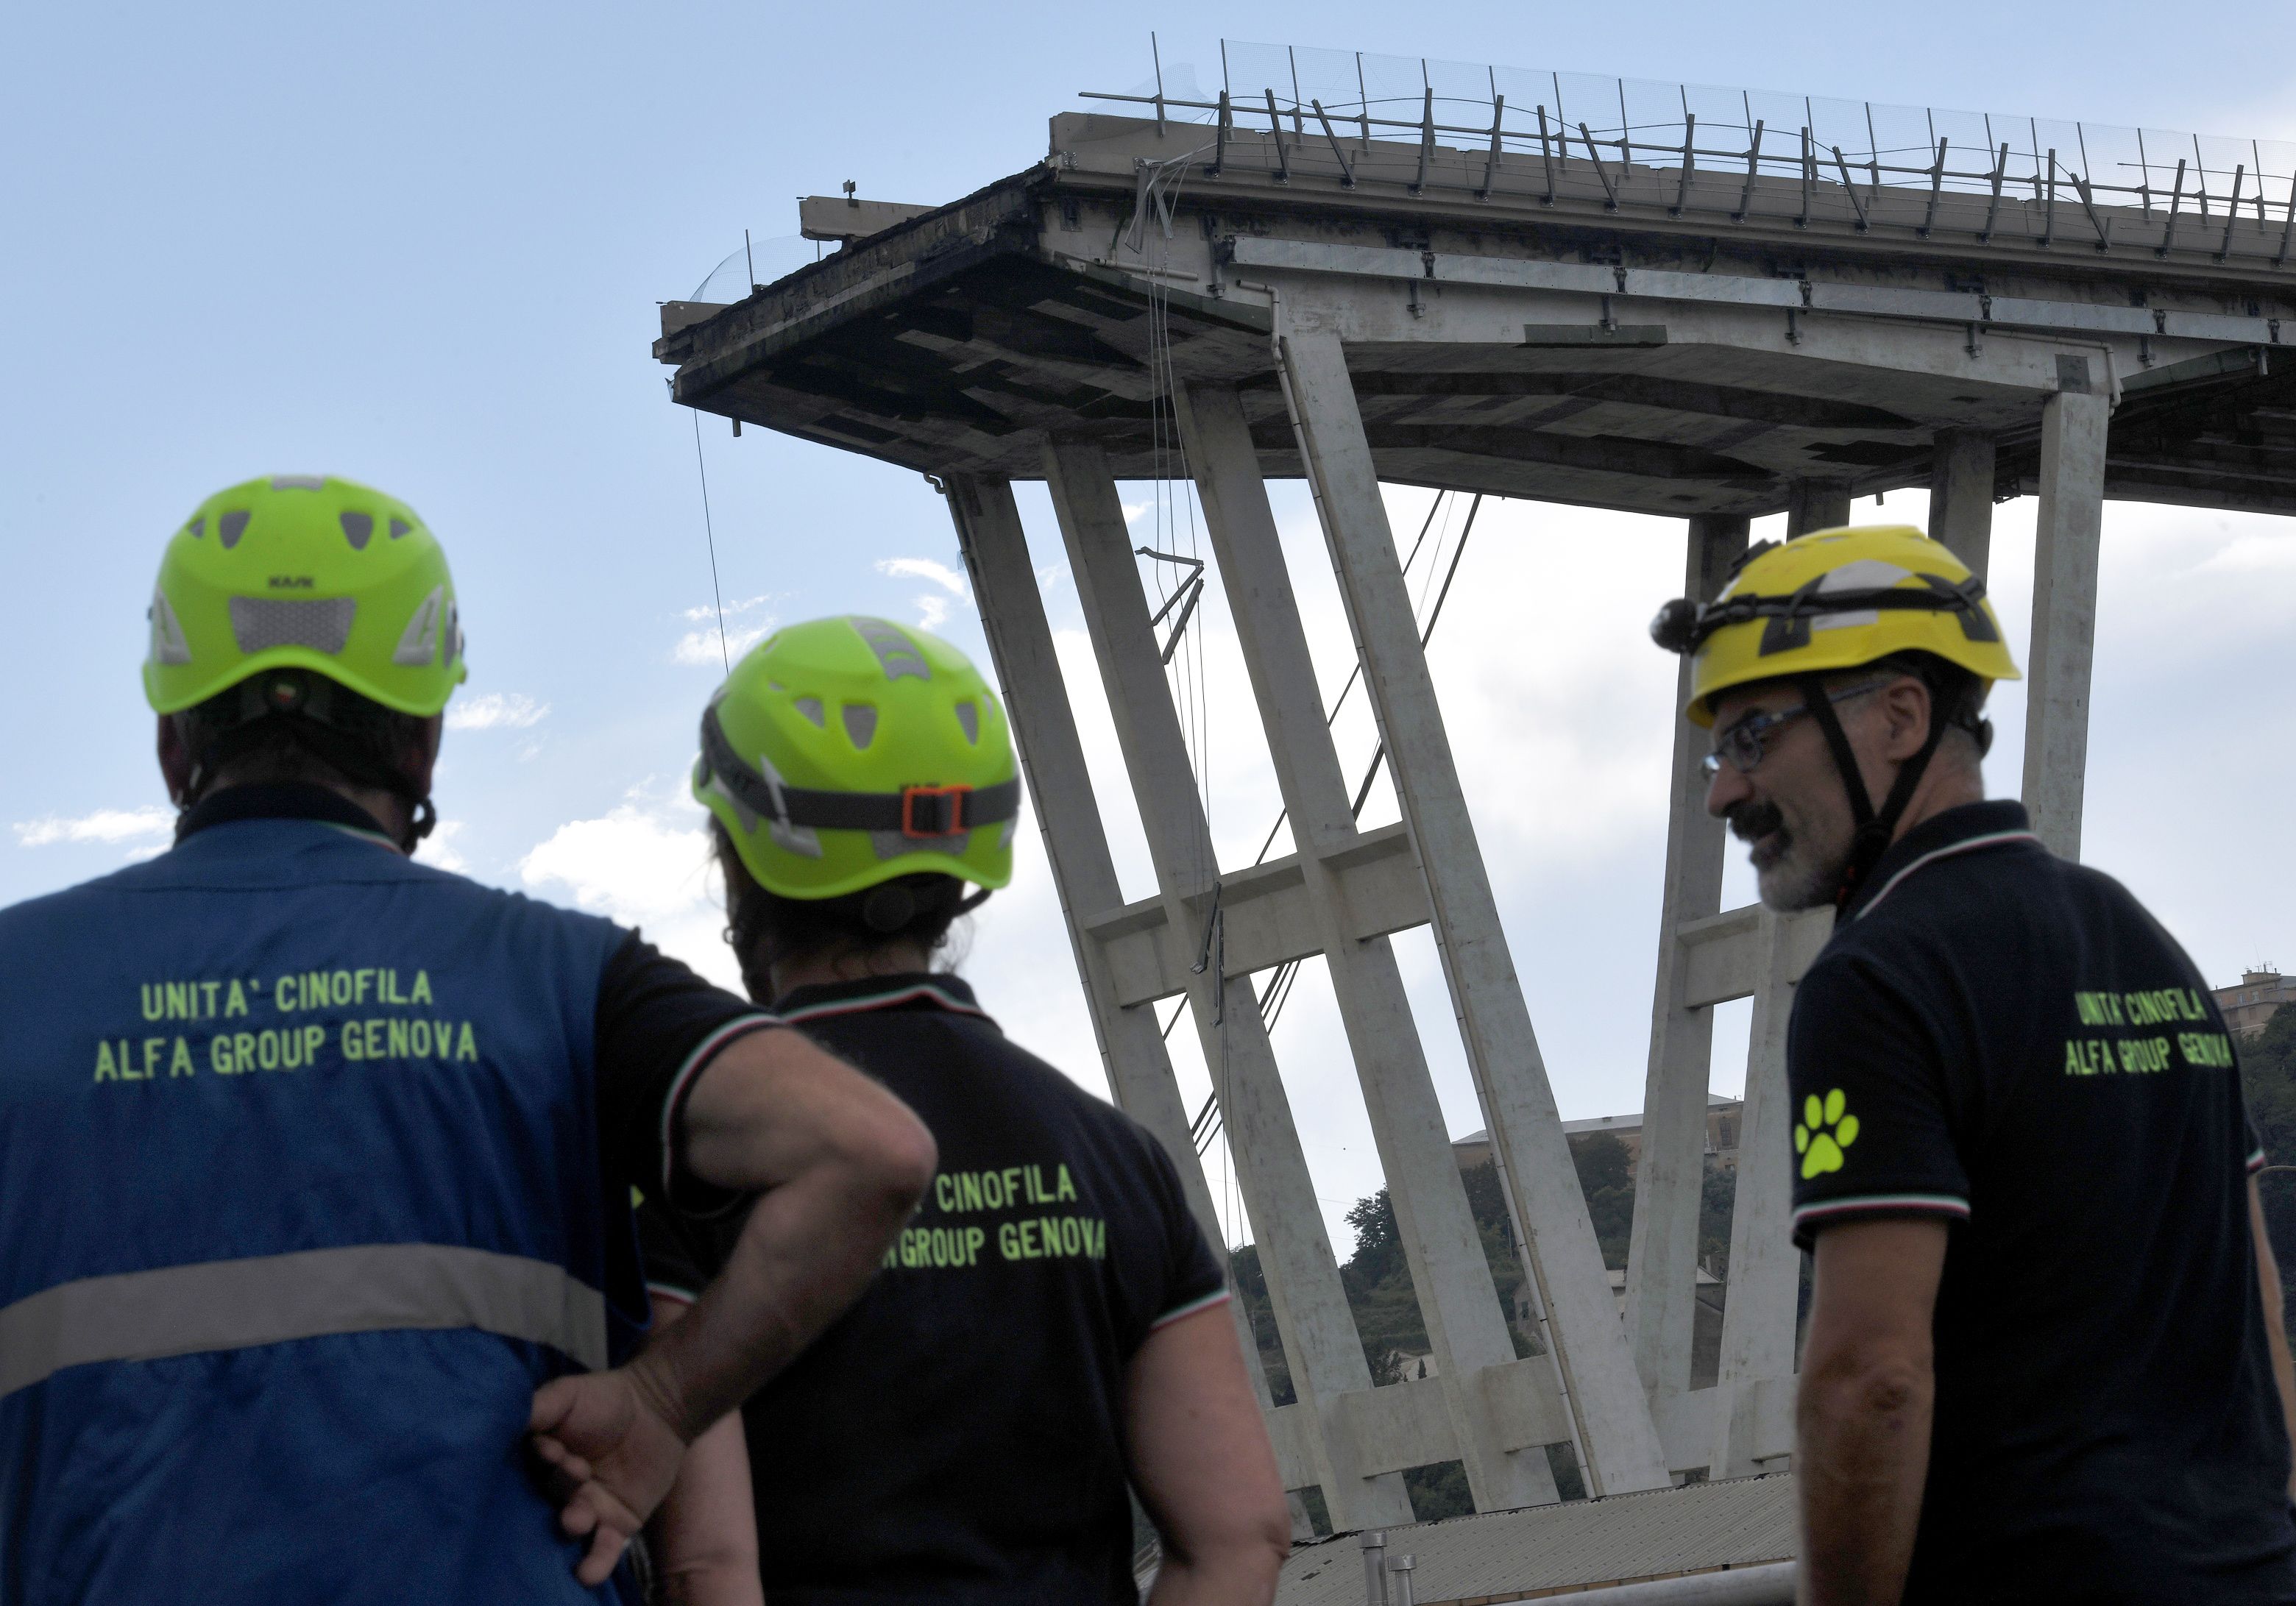 Rescuer look towards the Morandi motorway bridge after a section of the bridge collapsed earlier in Genoa on August 14, 2018. - At least 30 people were killed on August 14 when the giant motorway bridge collapsed in Genoa in northwestern Italy. The collapse, which saw a vast stretch of the A10 freeway tumble on to railway lines in the northern port city, was the deadliest bridge failure in Italy for years, and the country's deputy transport minister warned the death toll could climb further. (Photo by PIERO CRUCIATTI / AFP)